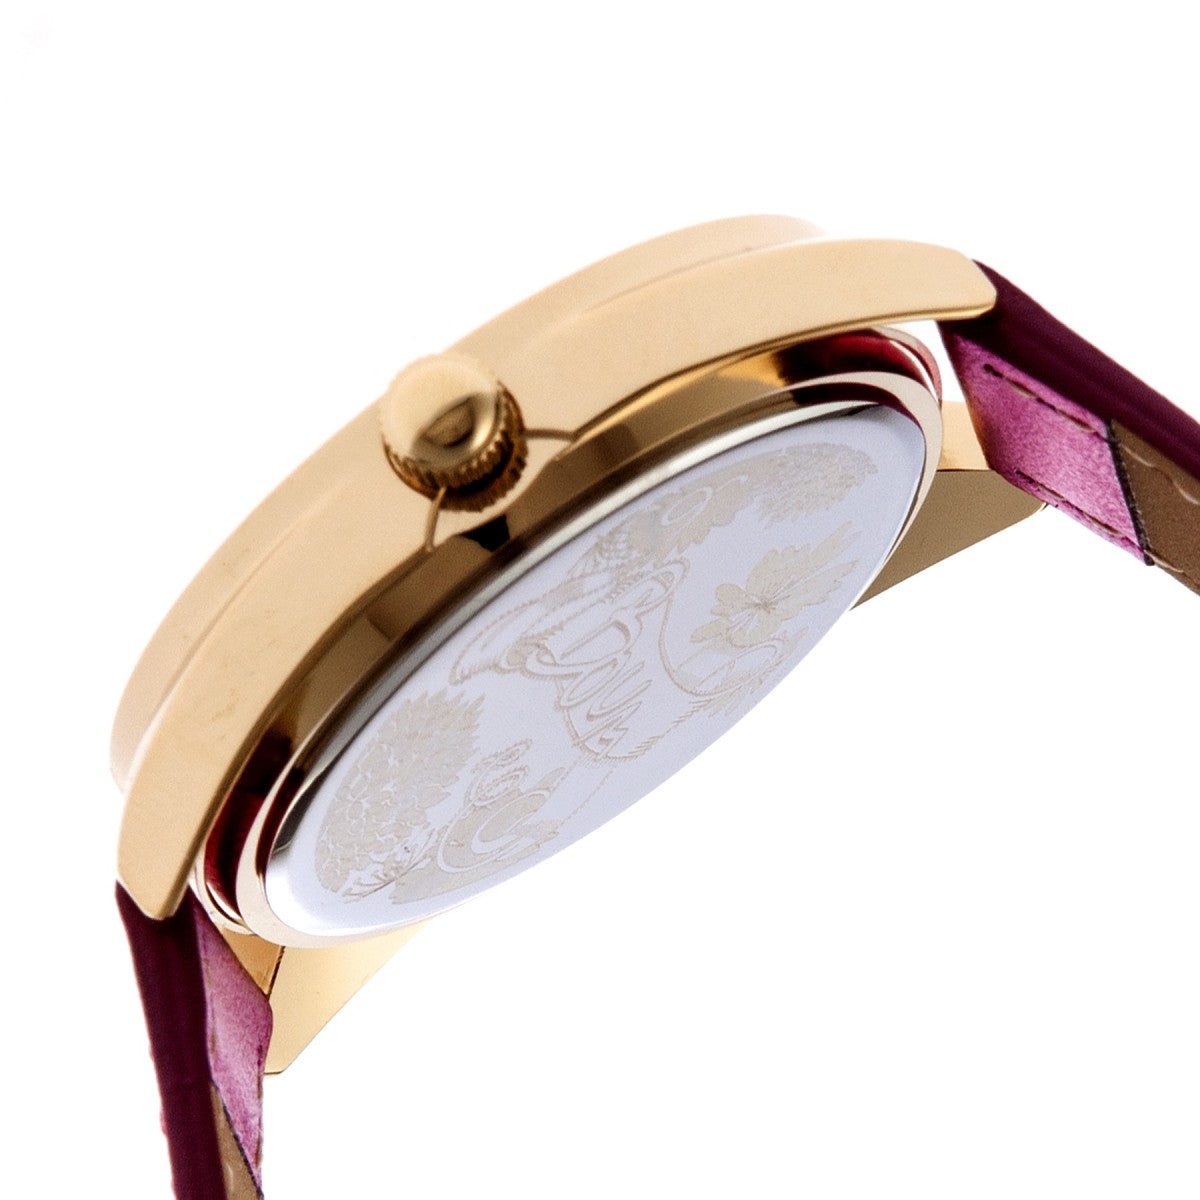 Boum Etoile Glitter-Dial Leather-Band Ladies Watch - Gold/Pink - BOUBM3103